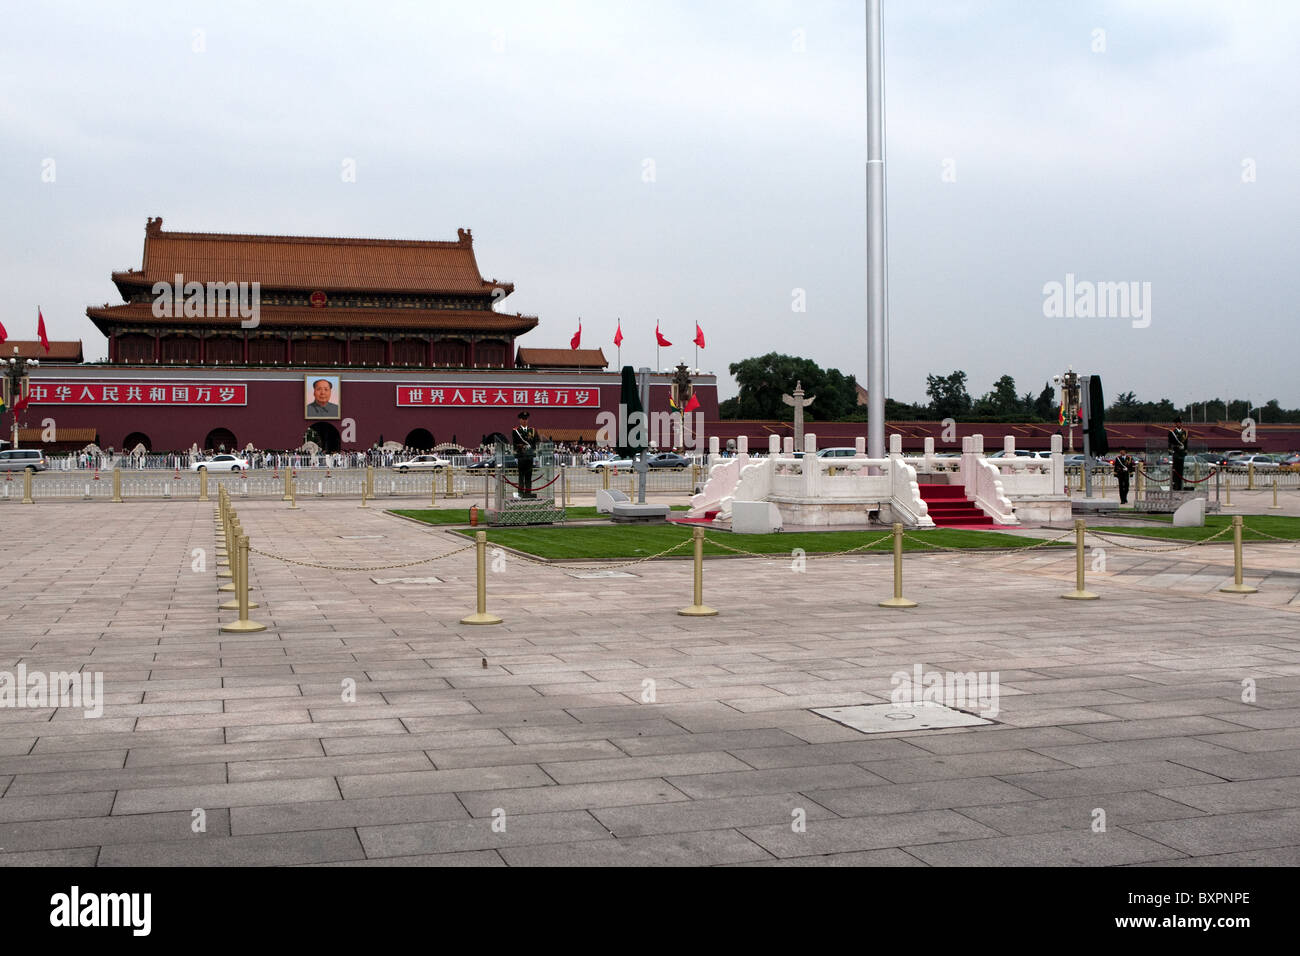 Entrance to The Forbidden City, GuGong, Beijing, China, + Mao Zetung + flag pole + soldiers Stock Photo